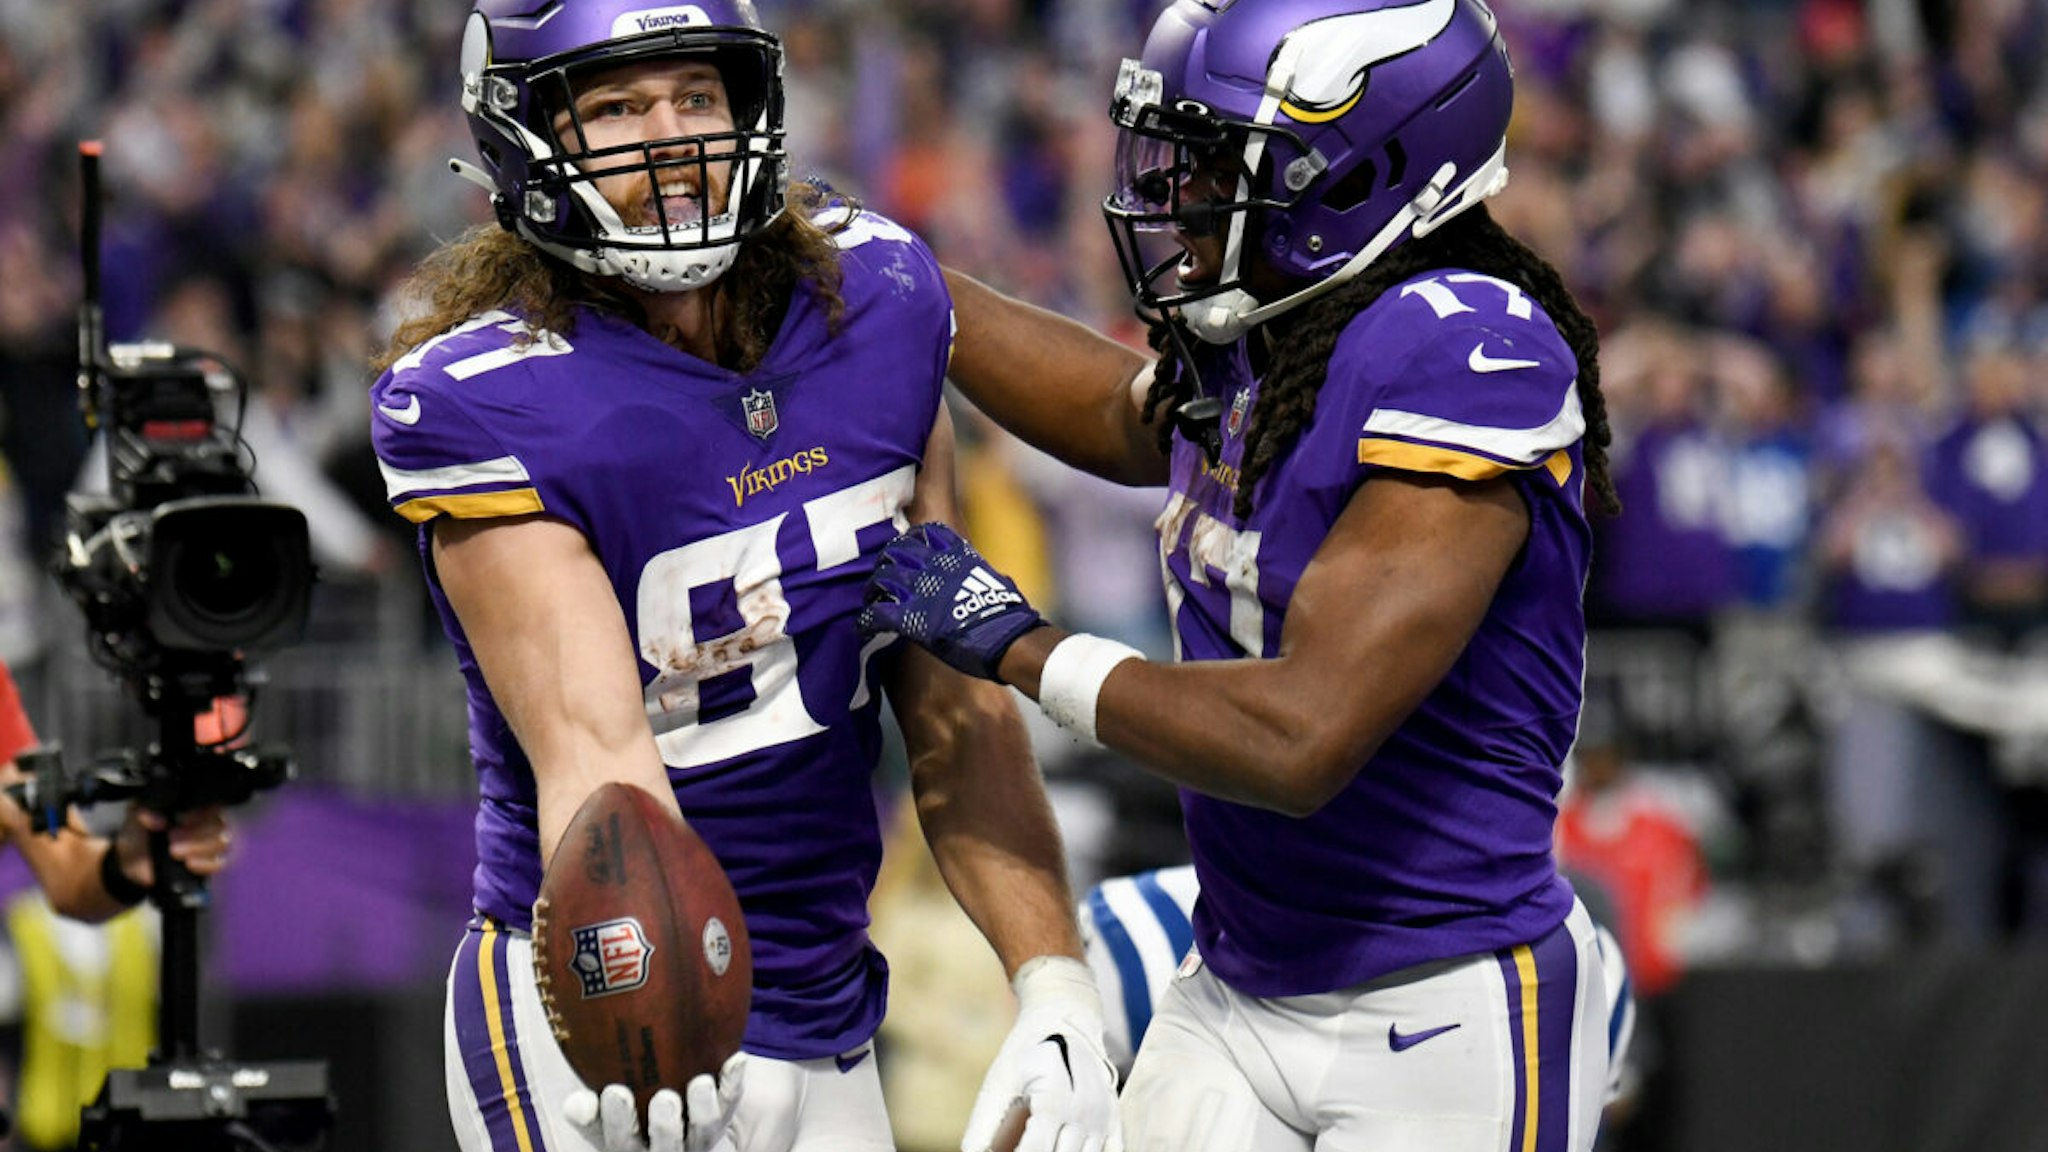 T.J. Hockenson #87 of the Minnesota Vikings celebrates after catching a pass for a successful two point conversion against the Indianapolis Colts during the fourth quarter of the game at U.S. Bank Stadium on December 17, 2022 in Minneapolis, Minnesota.